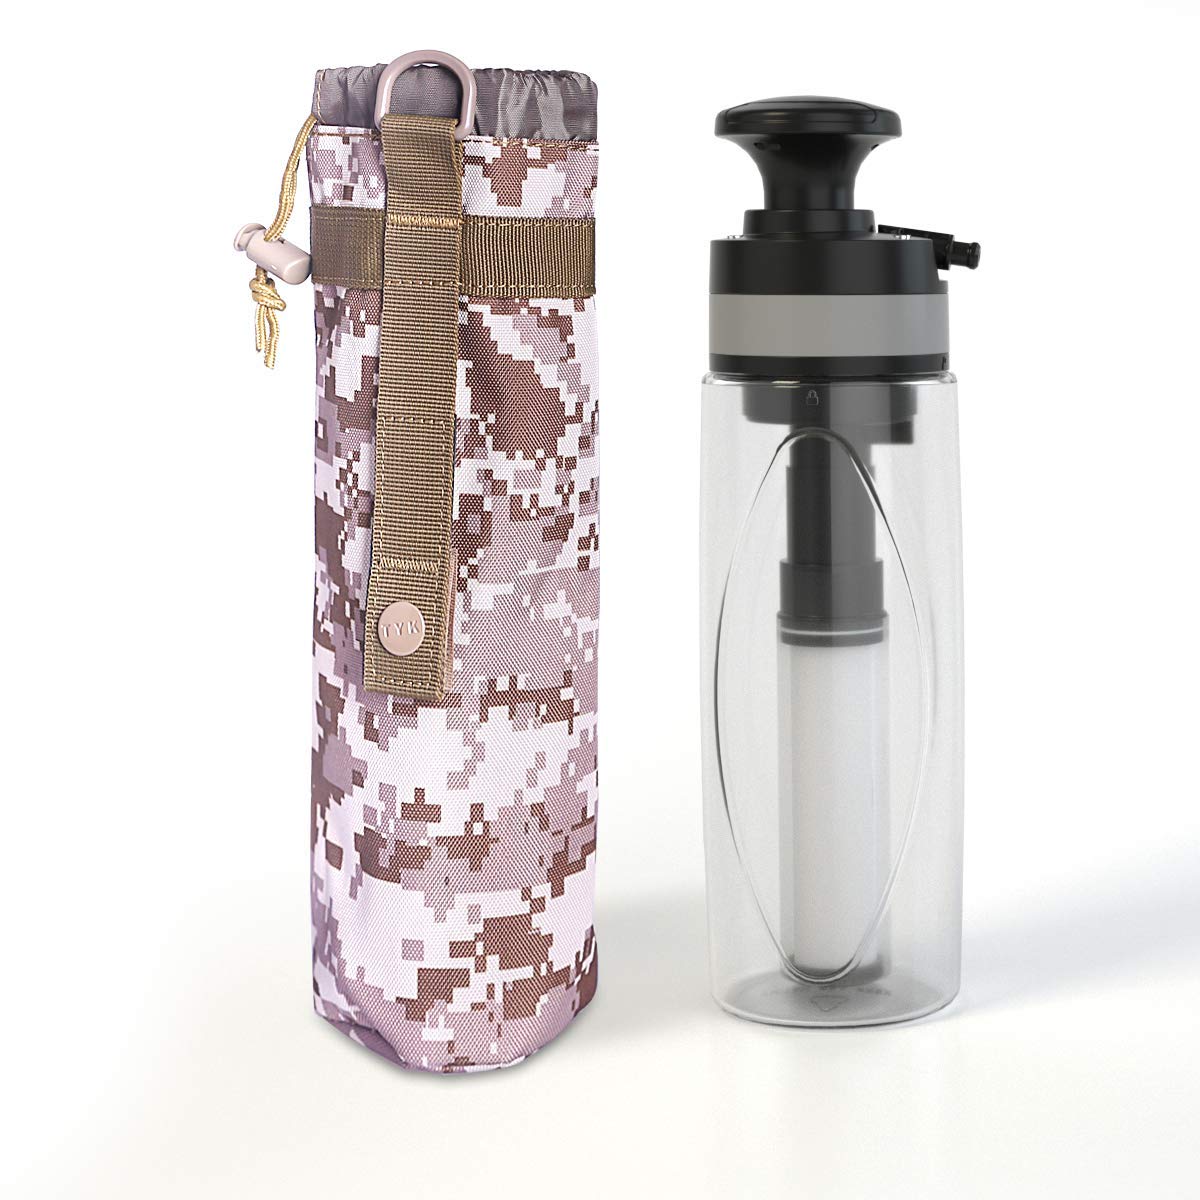 4Stage Portable Water Filter Bottle for Daily Use  Survival,Travel,Camping,Hiking